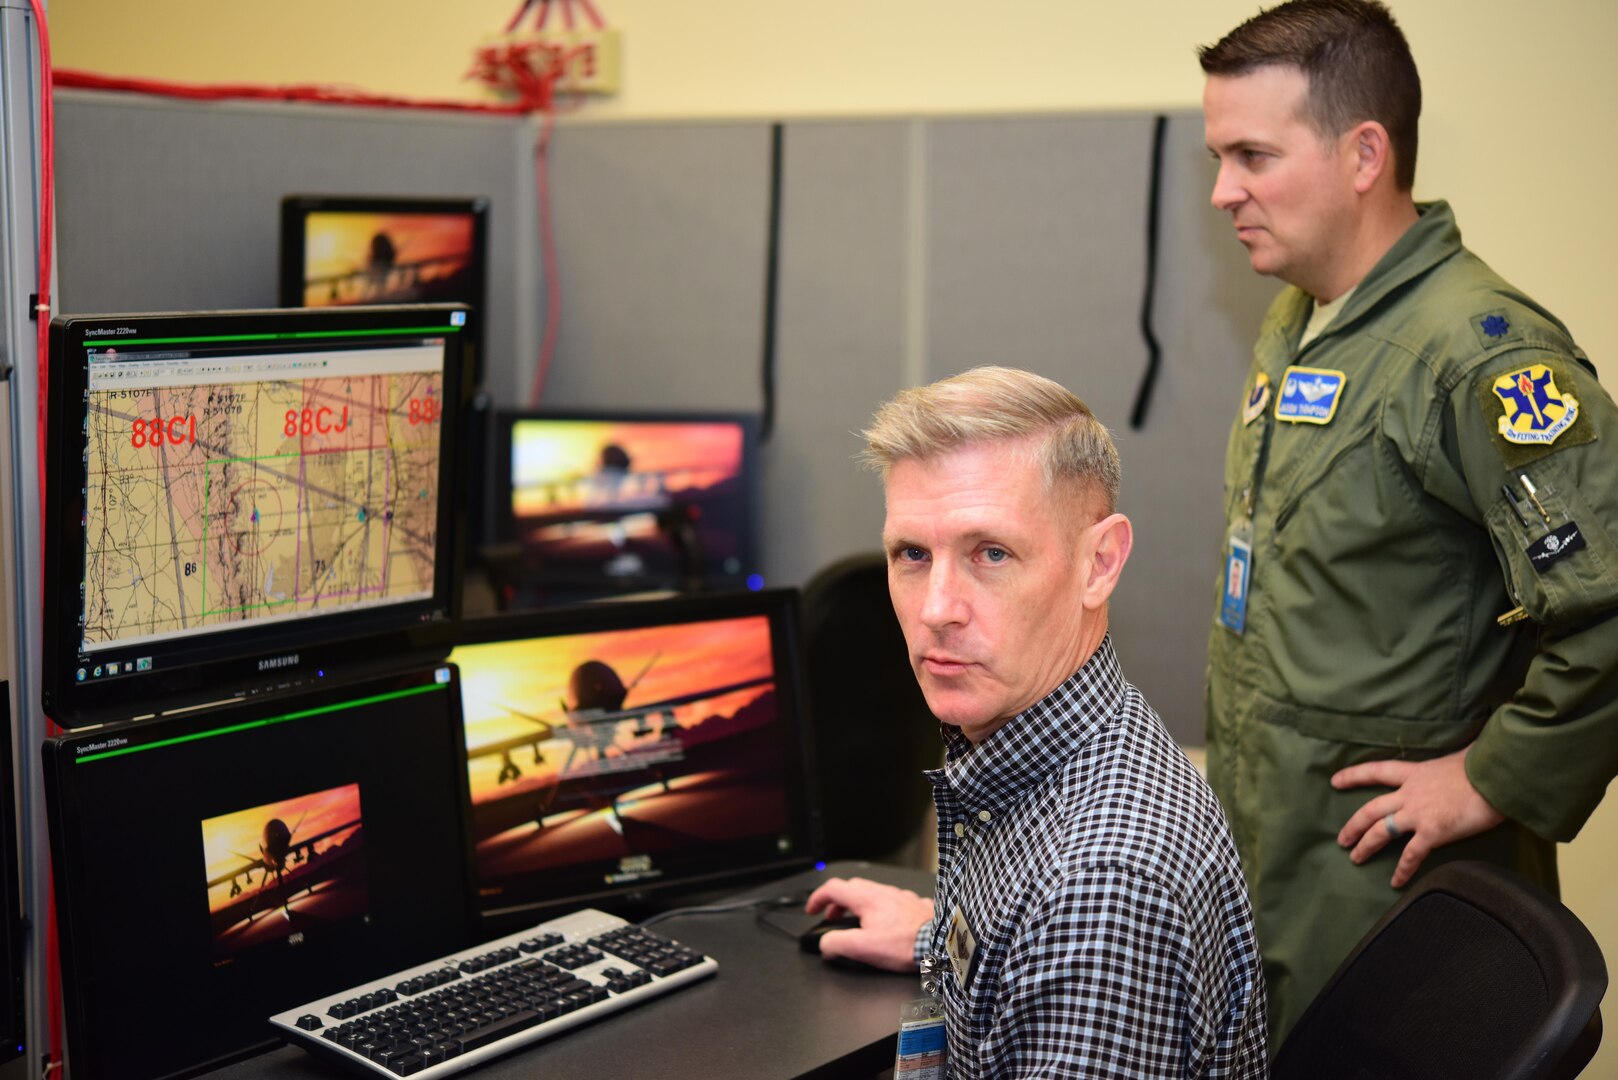 Remotely Piloted Aircraft Fundamentals Course Instructor Pilot Todd Felton of the 558th Flying Training Squadron describes the Predator Reaper Integrated Mission Environment simulator Oct. 13, 2017 at Joint Base San Antonio-Randolph as Lt. Col. Jason Thompson, 558th FTS commander listens.  PRIME allows RPA pilots and sensor operators to train together ahead of their training on a major weapon system.  (U.S. Air Force photo by Randy Martin)